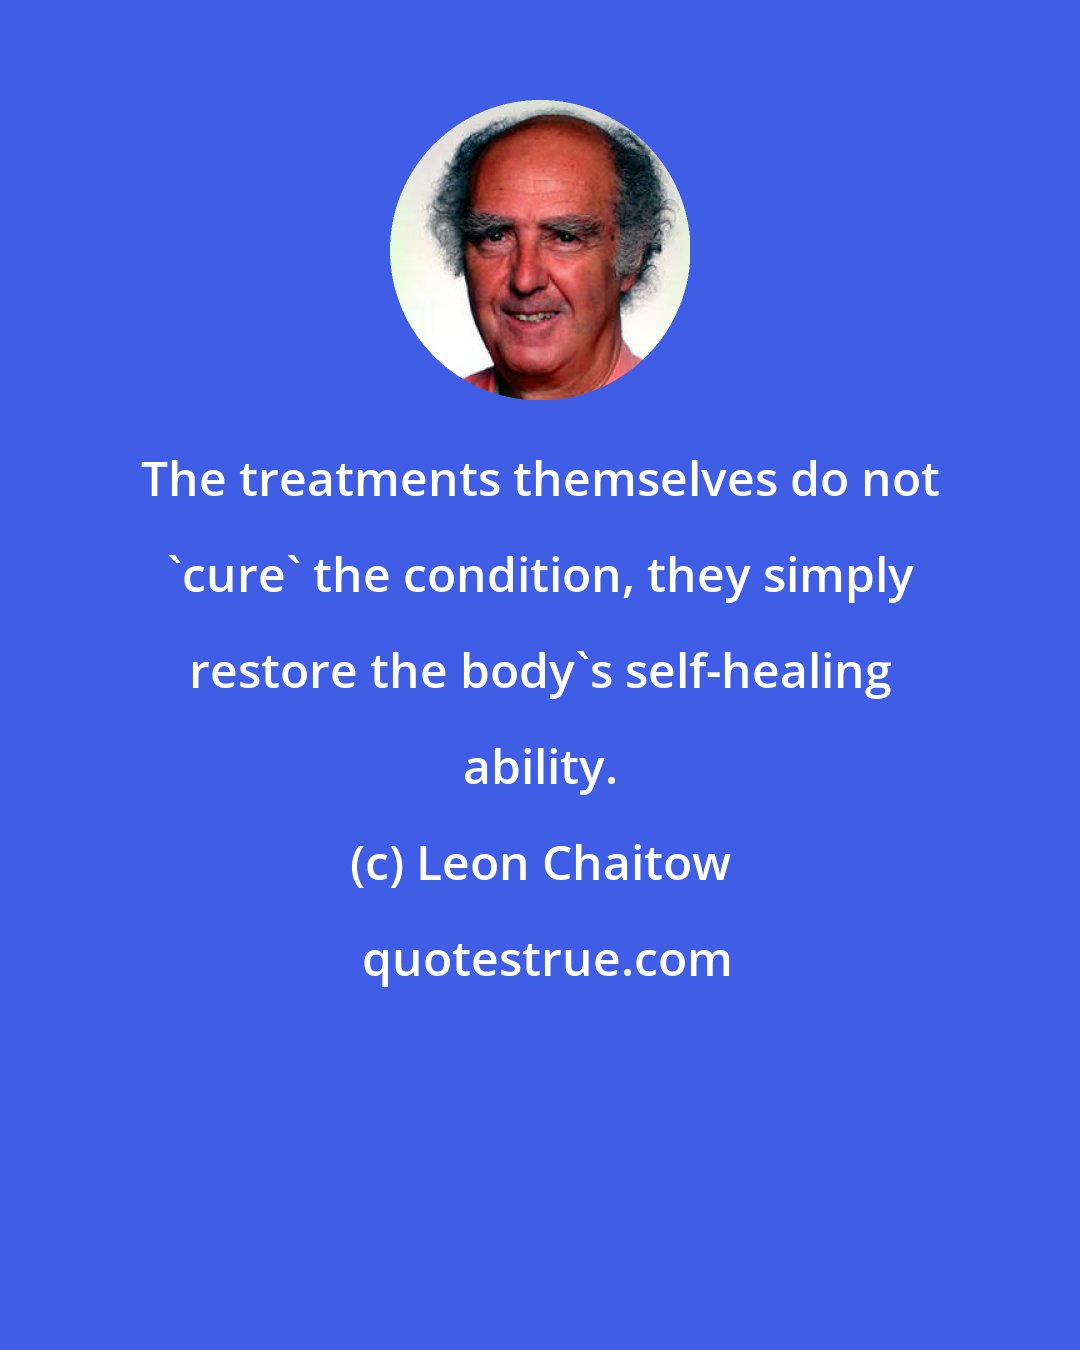 Leon Chaitow: The treatments themselves do not 'cure' the condition, they simply restore the body's self-healing ability.